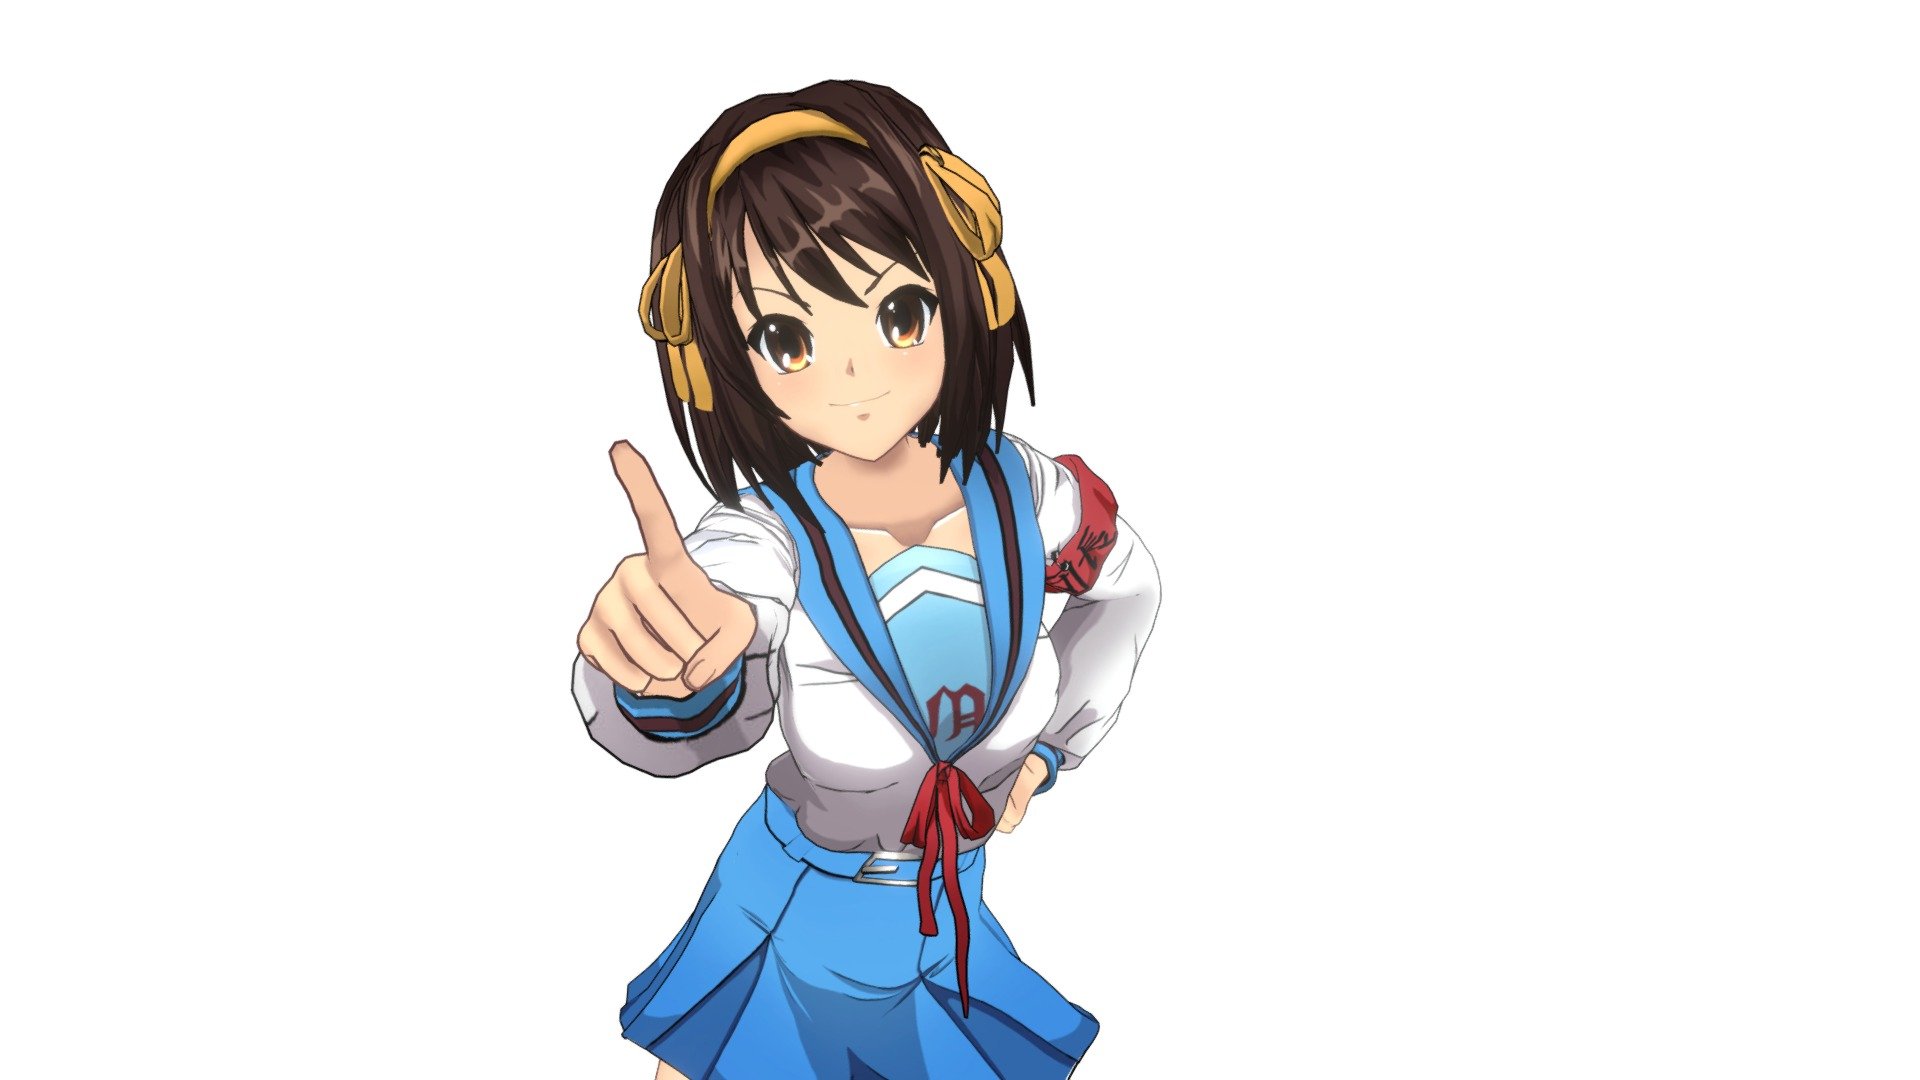 3D Fanart of Suzumiya Haruhi, Suzumiya Haruhi no Yuutsu anime character.

Modeled in Zbrush, Blender and Maya, texturized in 3D Coat.

Rigged Blend and Fbx file in the downloadable file!

Artstation Page: https://www.artstation.com/artwork/rJ0KEO - Suzumiya Haruhi - Suzumiya Haruhi no Yuutsu - Buy Royalty Free 3D model by Allan Mitsuse (@allanmit) 3d model